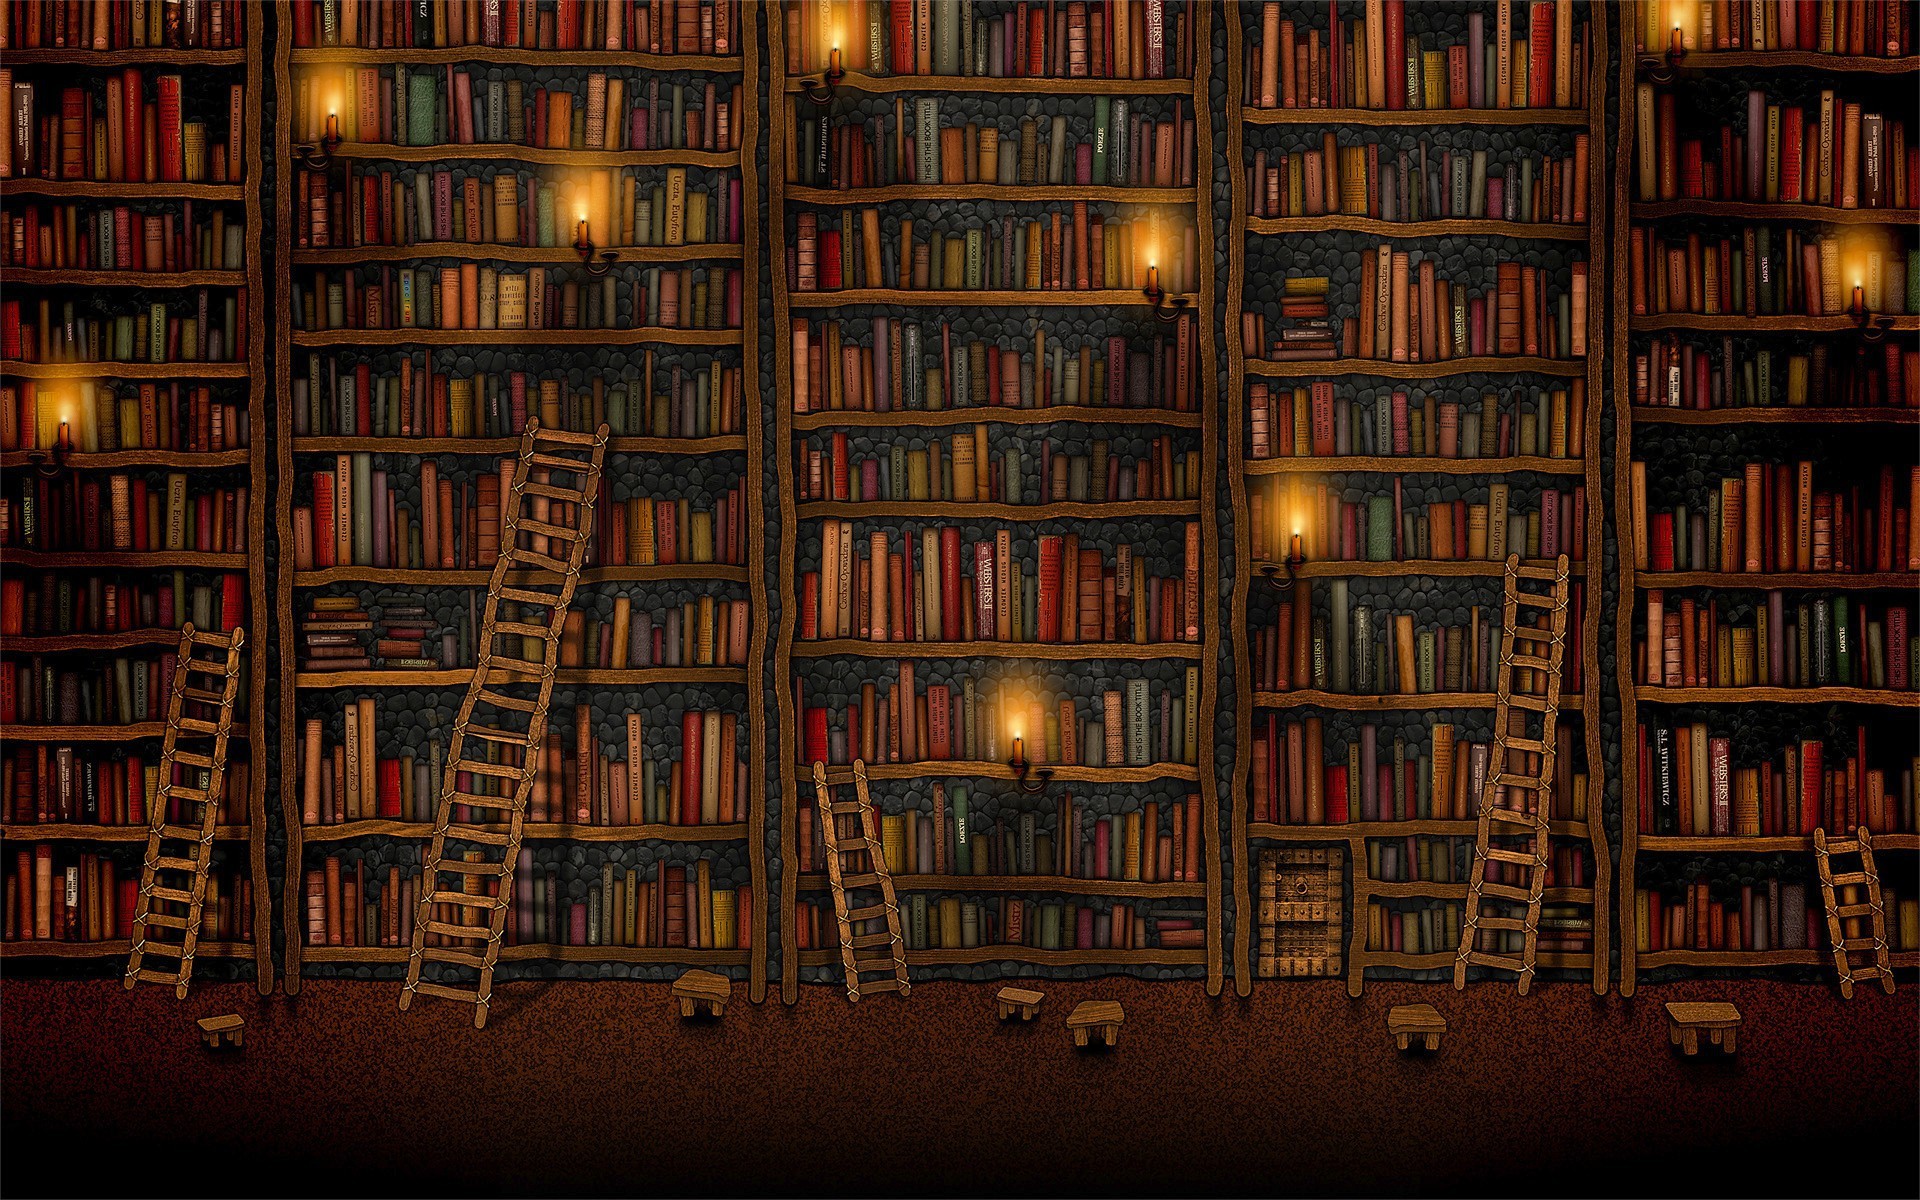 Drawn_wallpapers_Library_with_lots_of_books_093758_.jpg